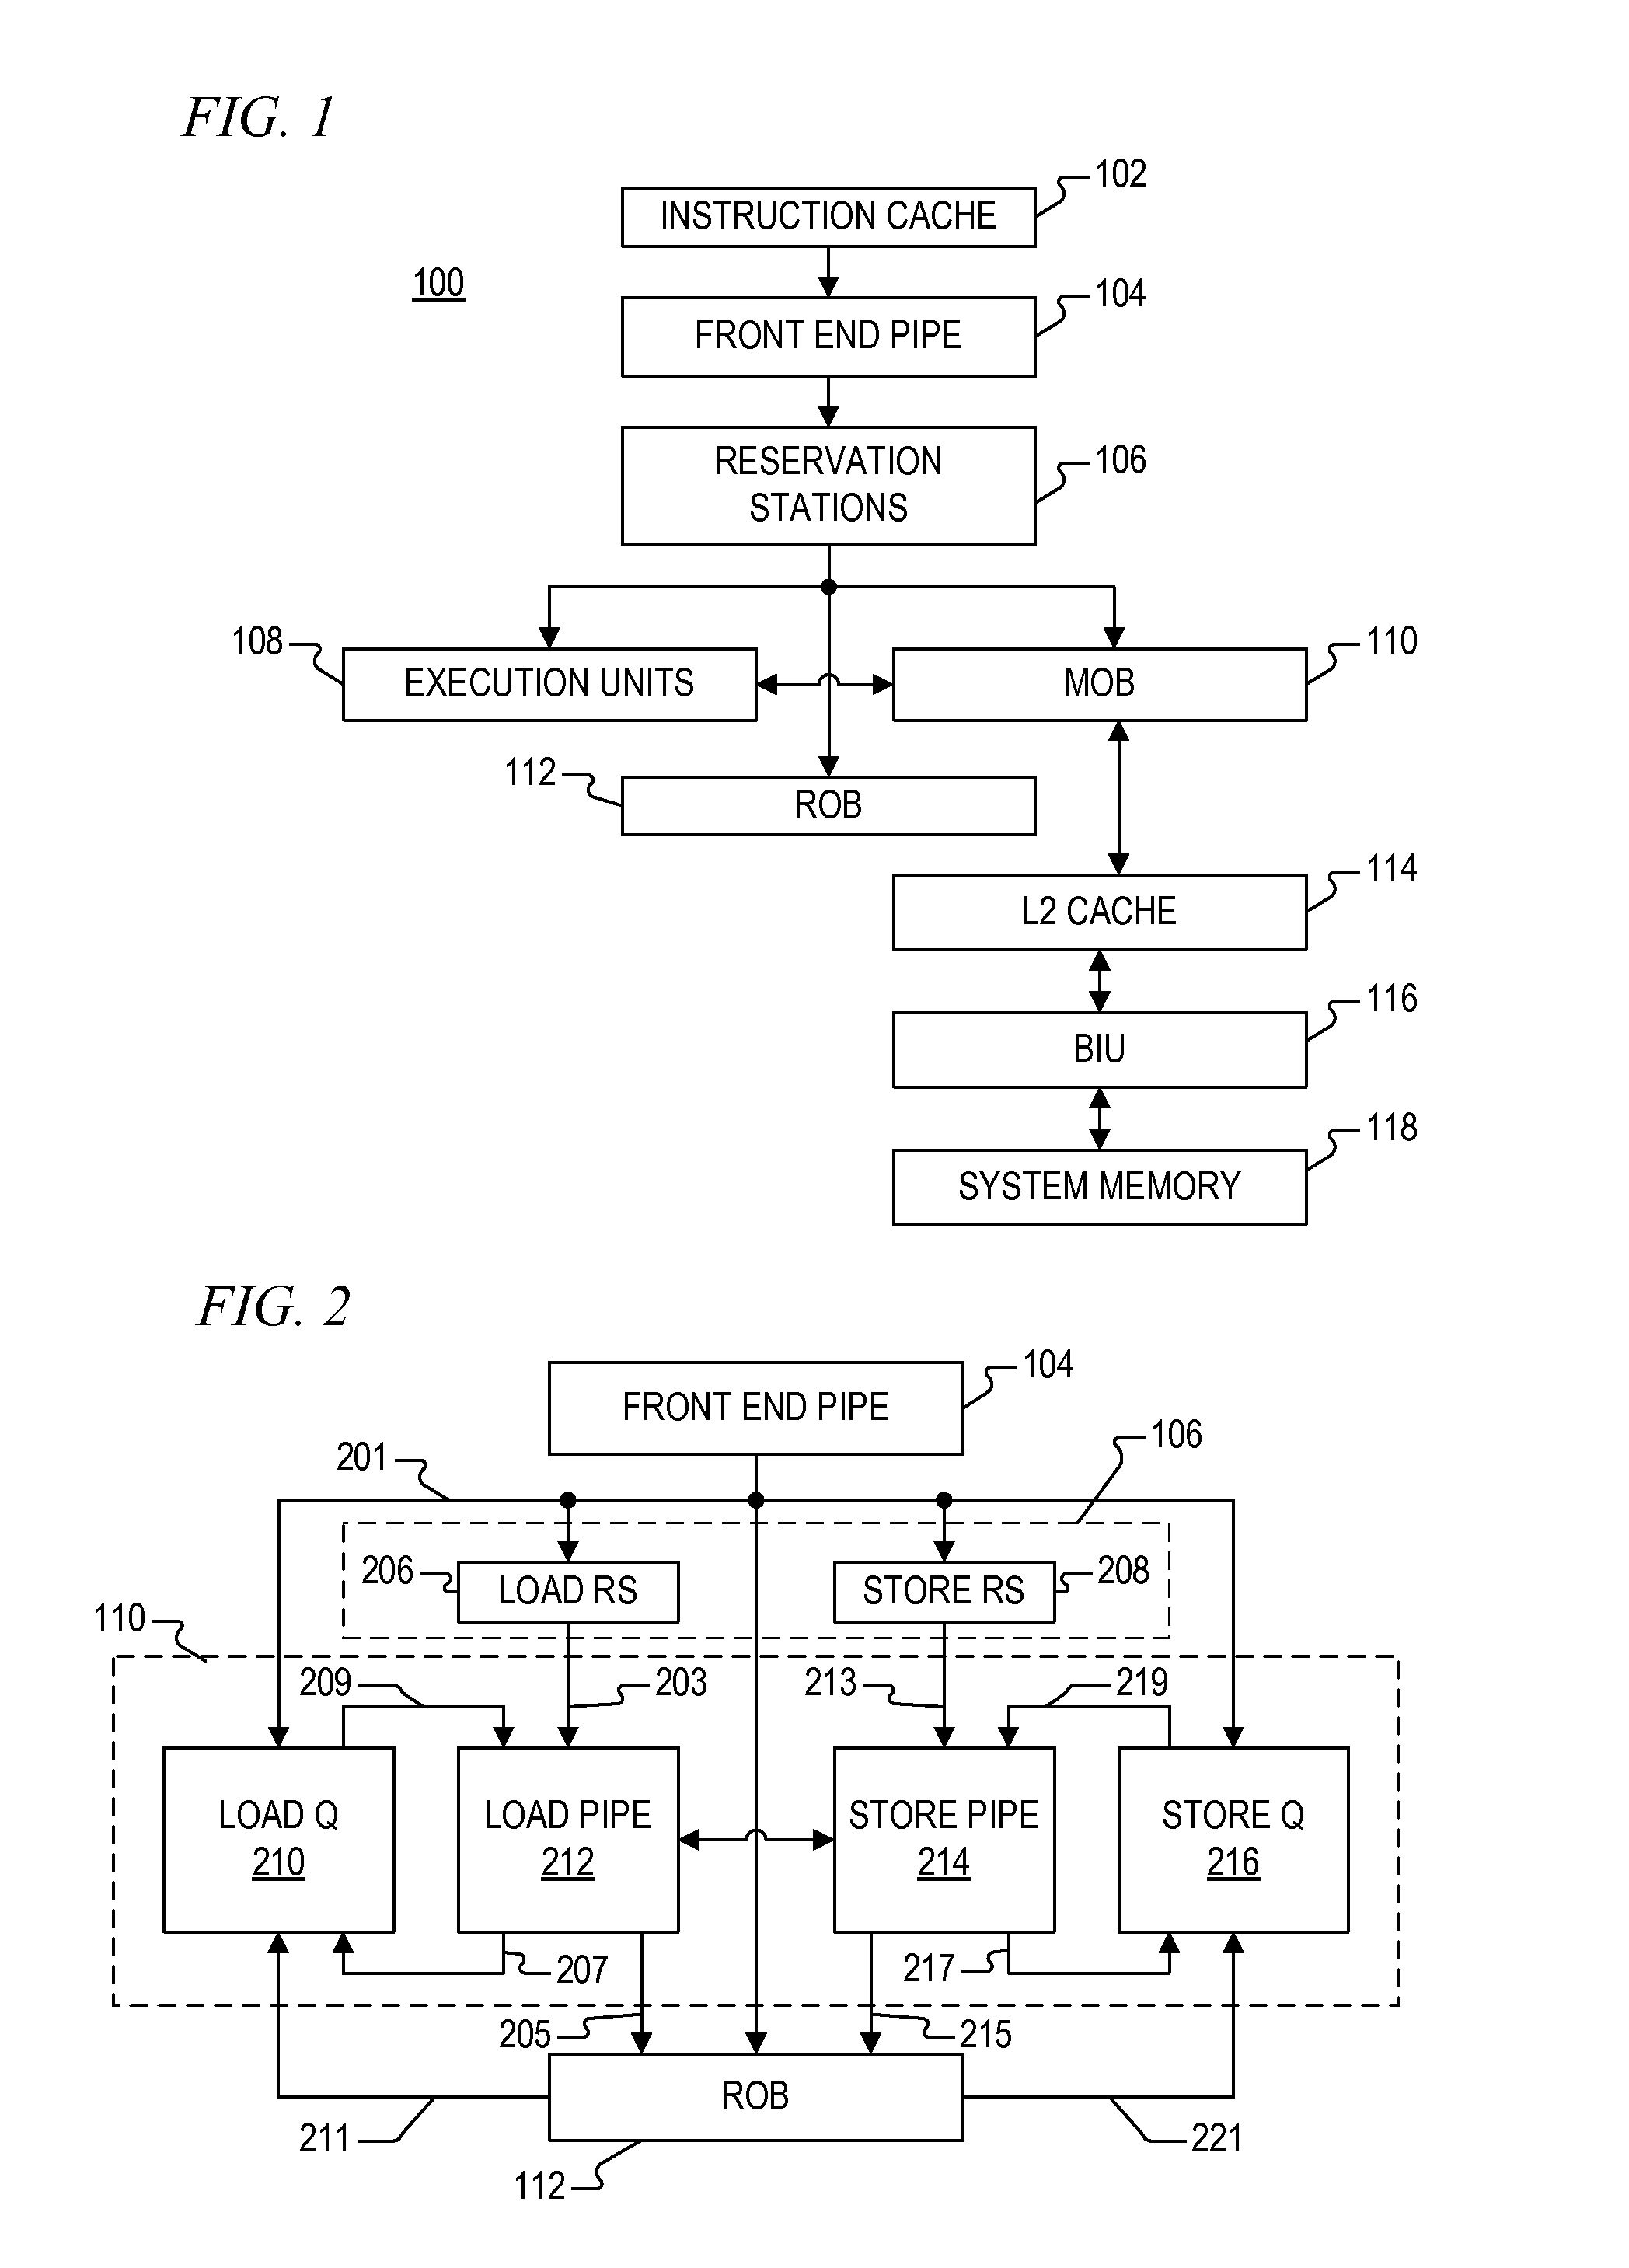 Cache system with a primary cache and an overflow cache that use different indexing schemes